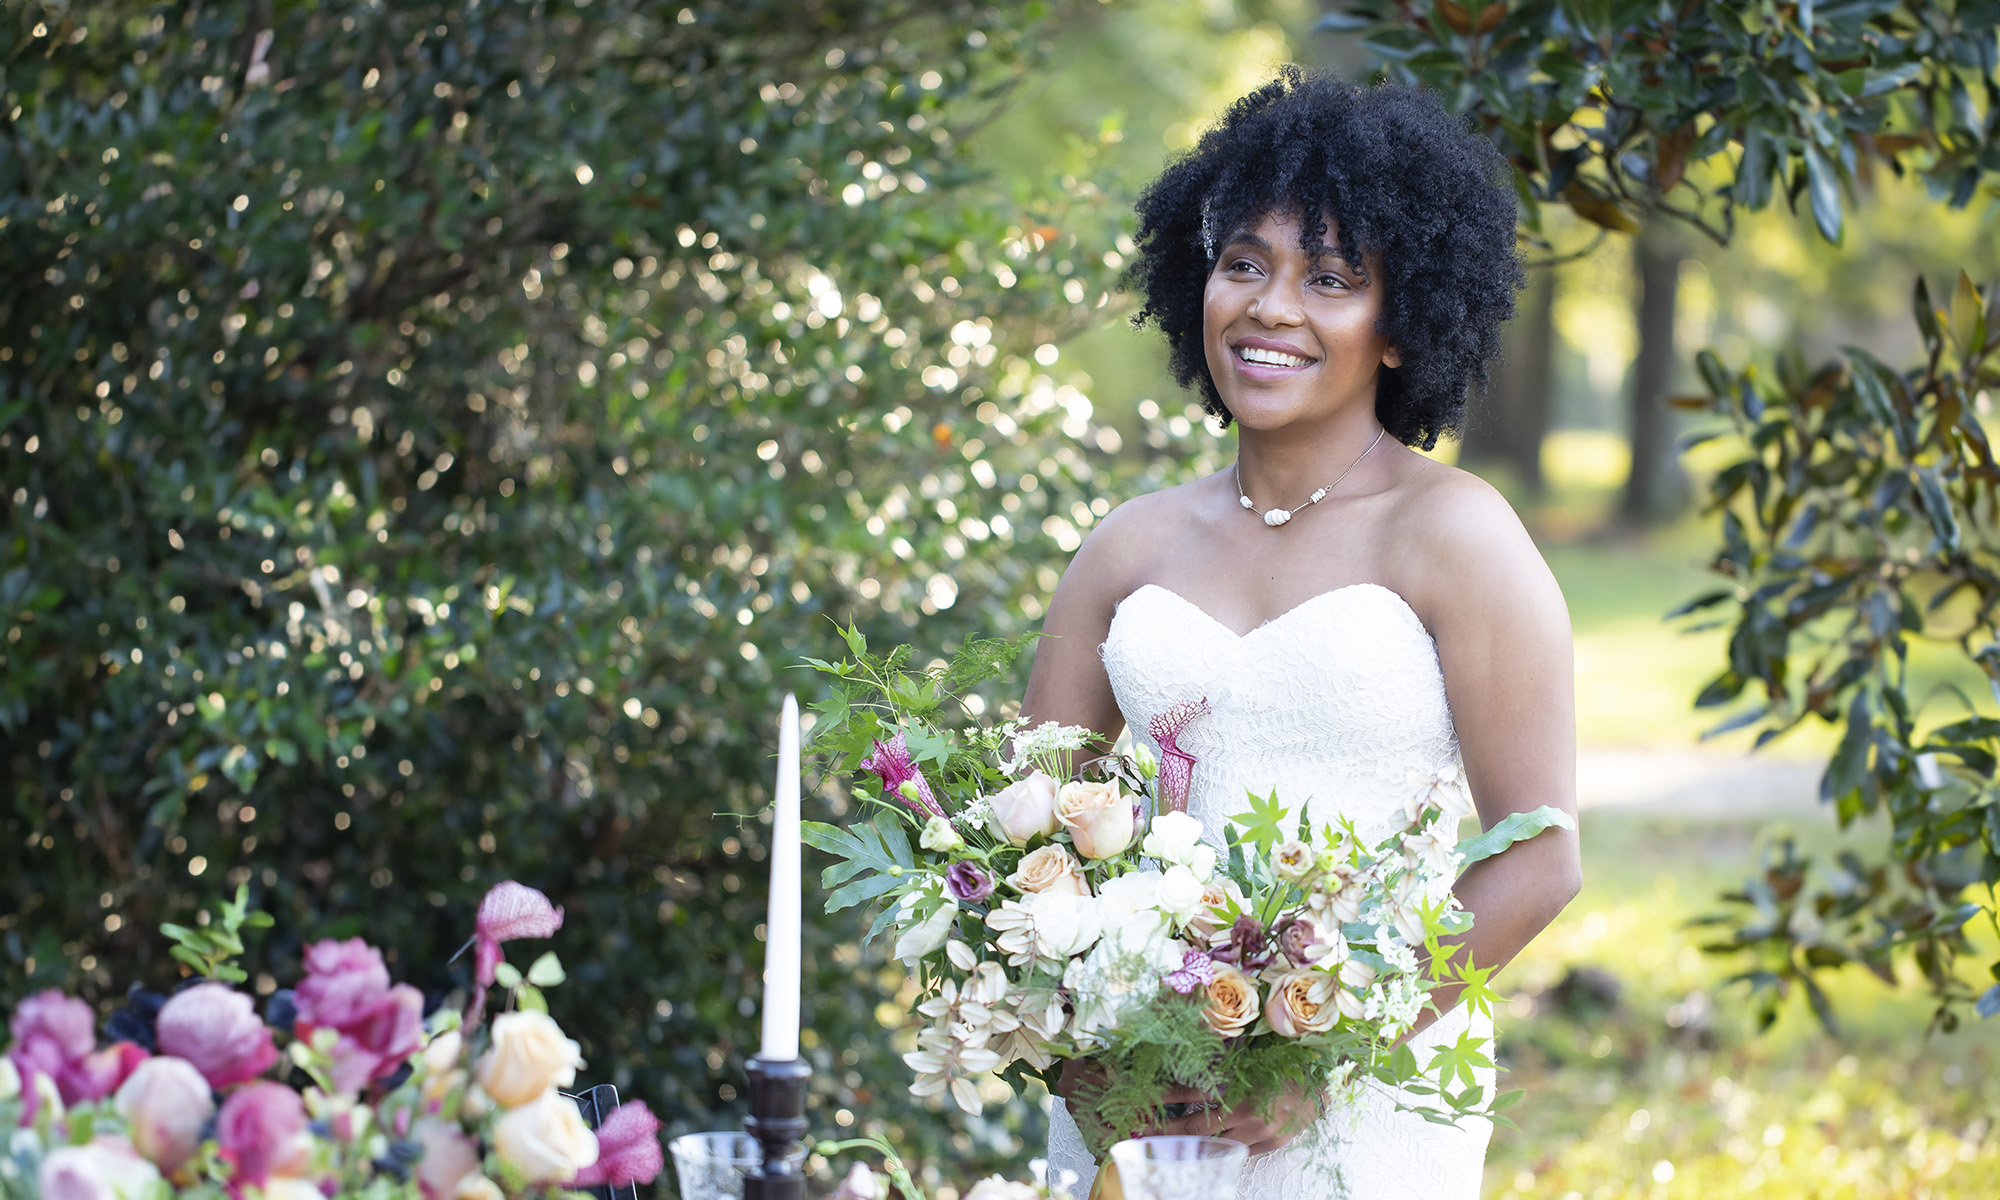 Blush Bridal and Formal Wear - bride in natural hair outdoors in strapless wedding dress holding a bouquet